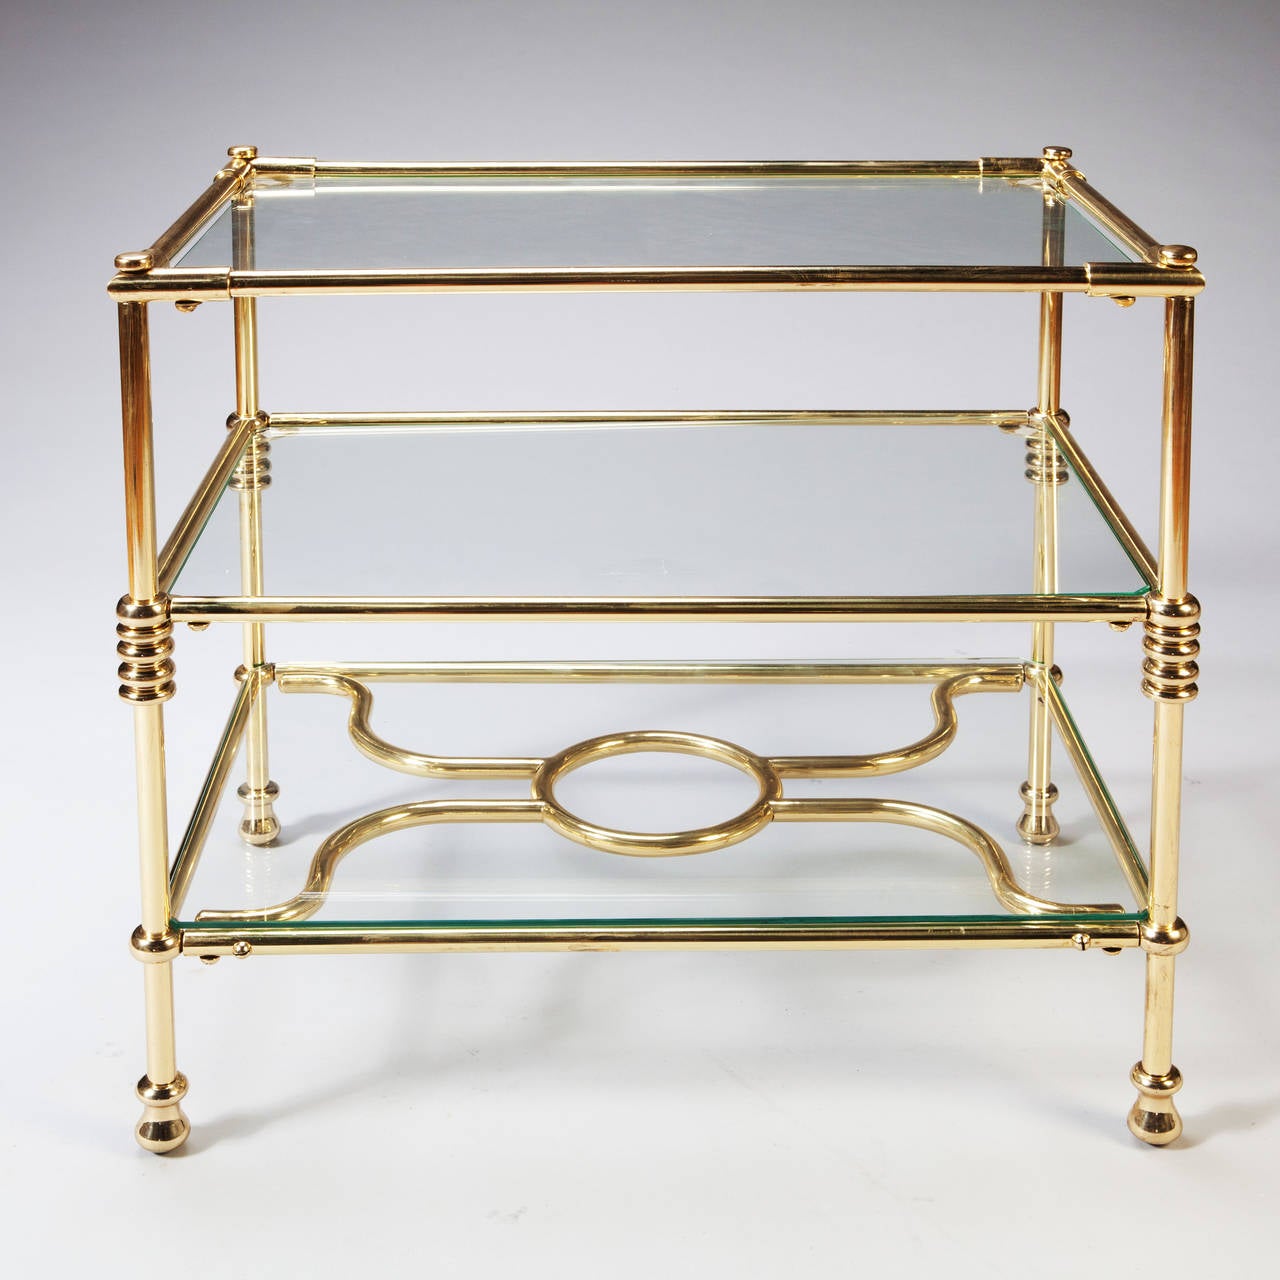 An early 20th century polished brass three-tiered etagere.